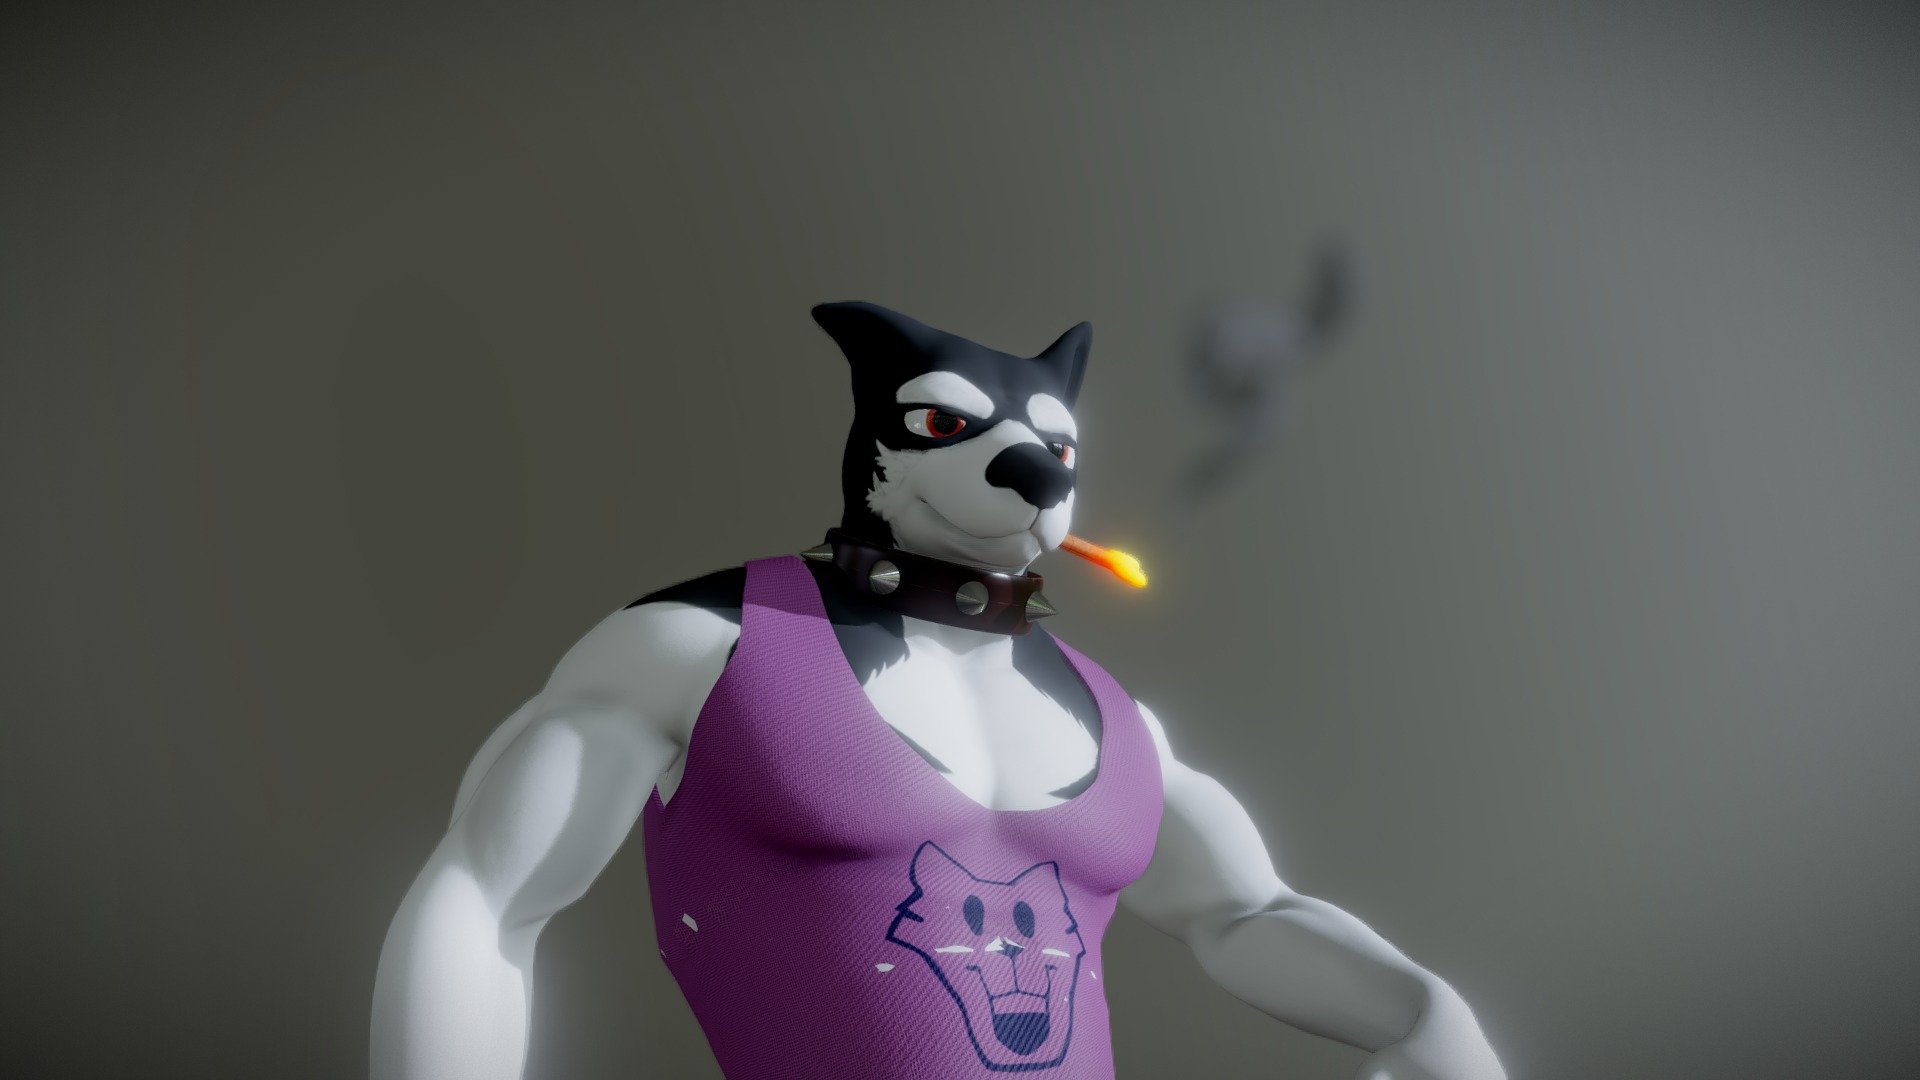 Here is an Idile animtion of the doggo model that I created some ago - Undertale Doggo Fanart Idile Animation - Download Free 3D model by hullalmiah 3d model